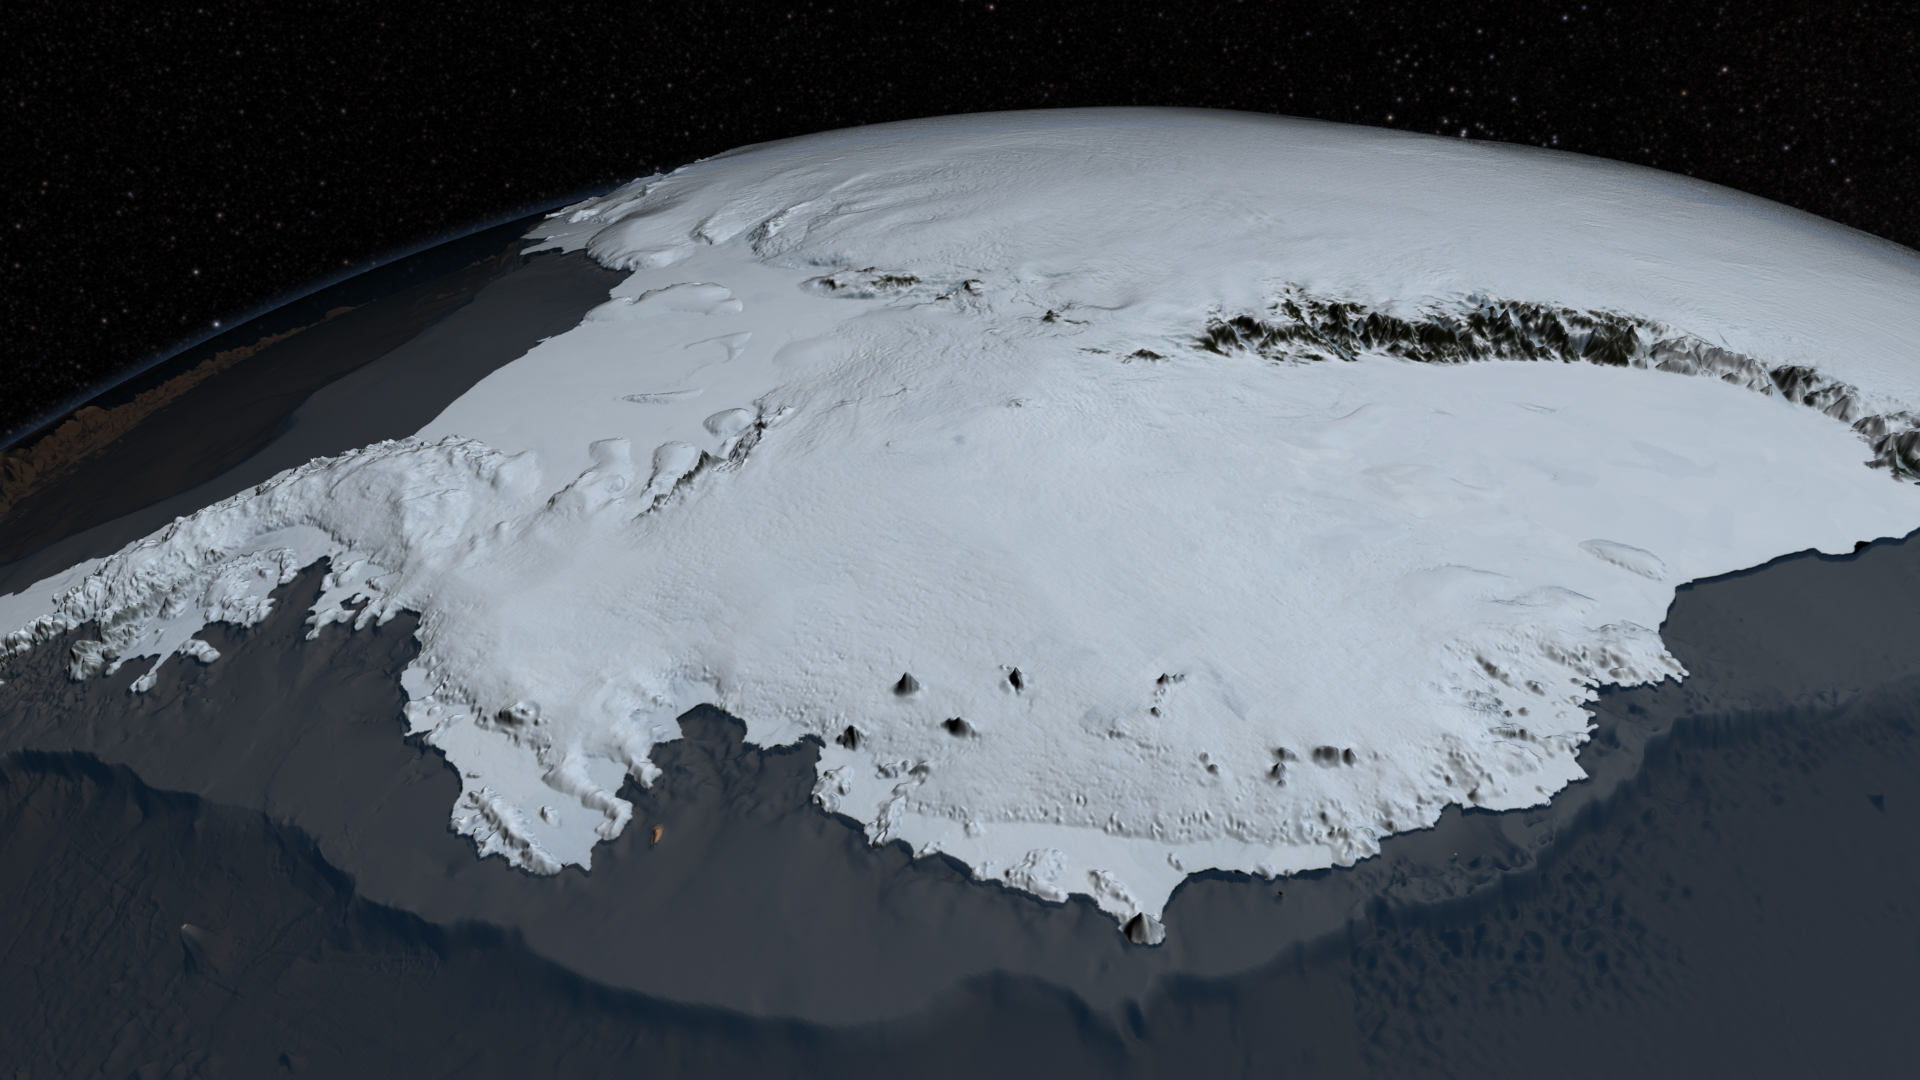 Image showing the Antarctic' surface with the ice sheet as seen from space